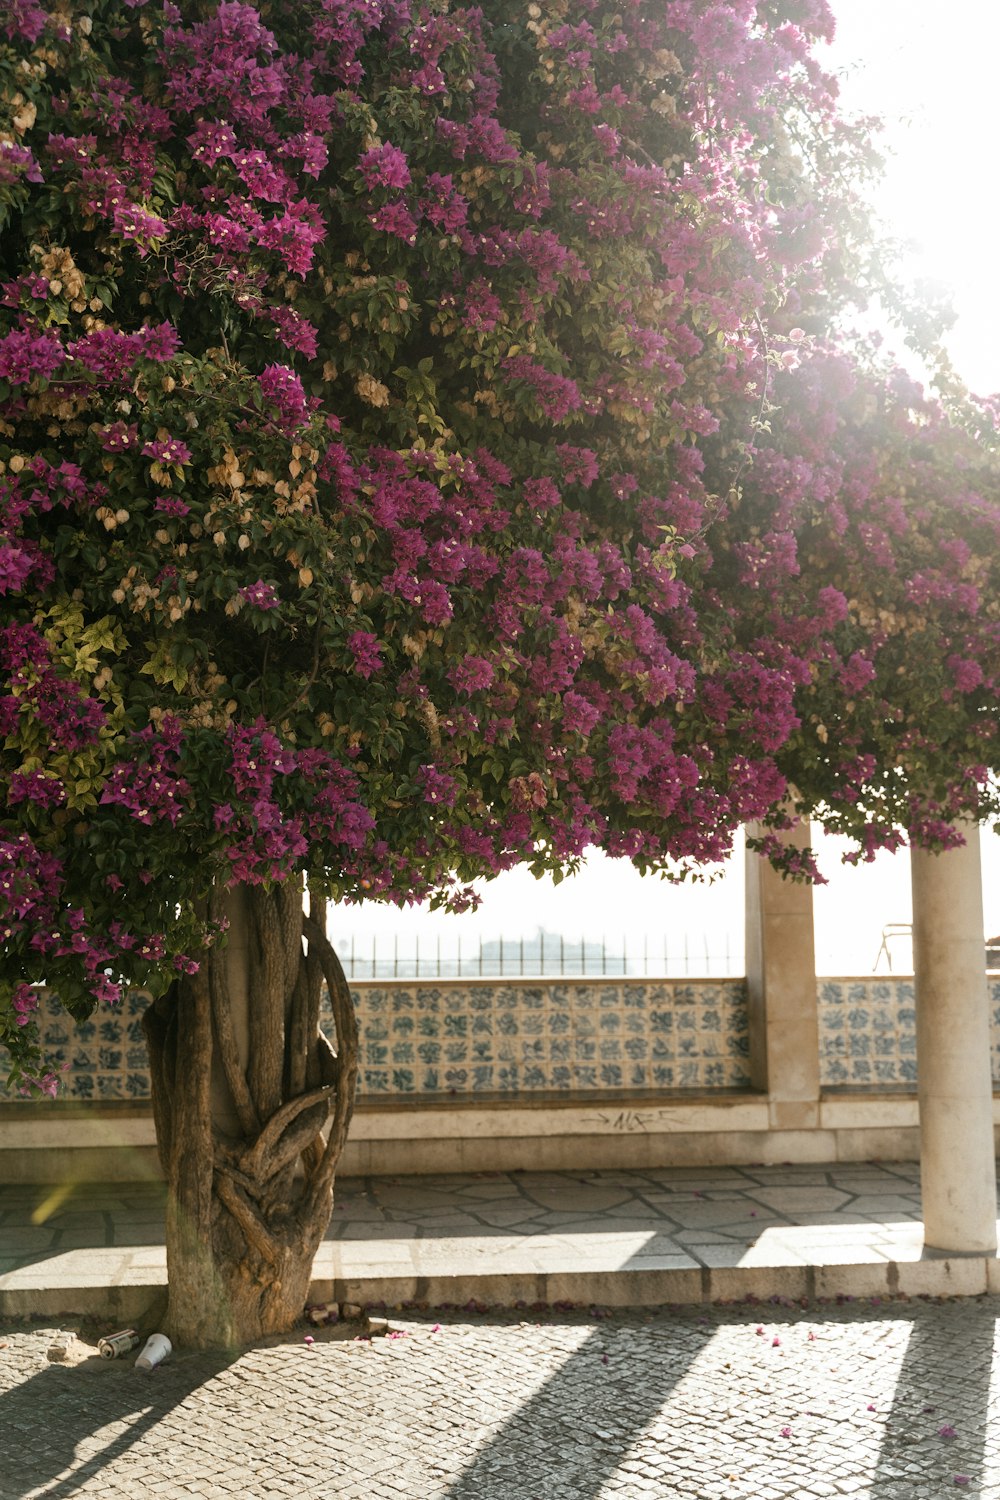 a tree with purple flowers in a vase